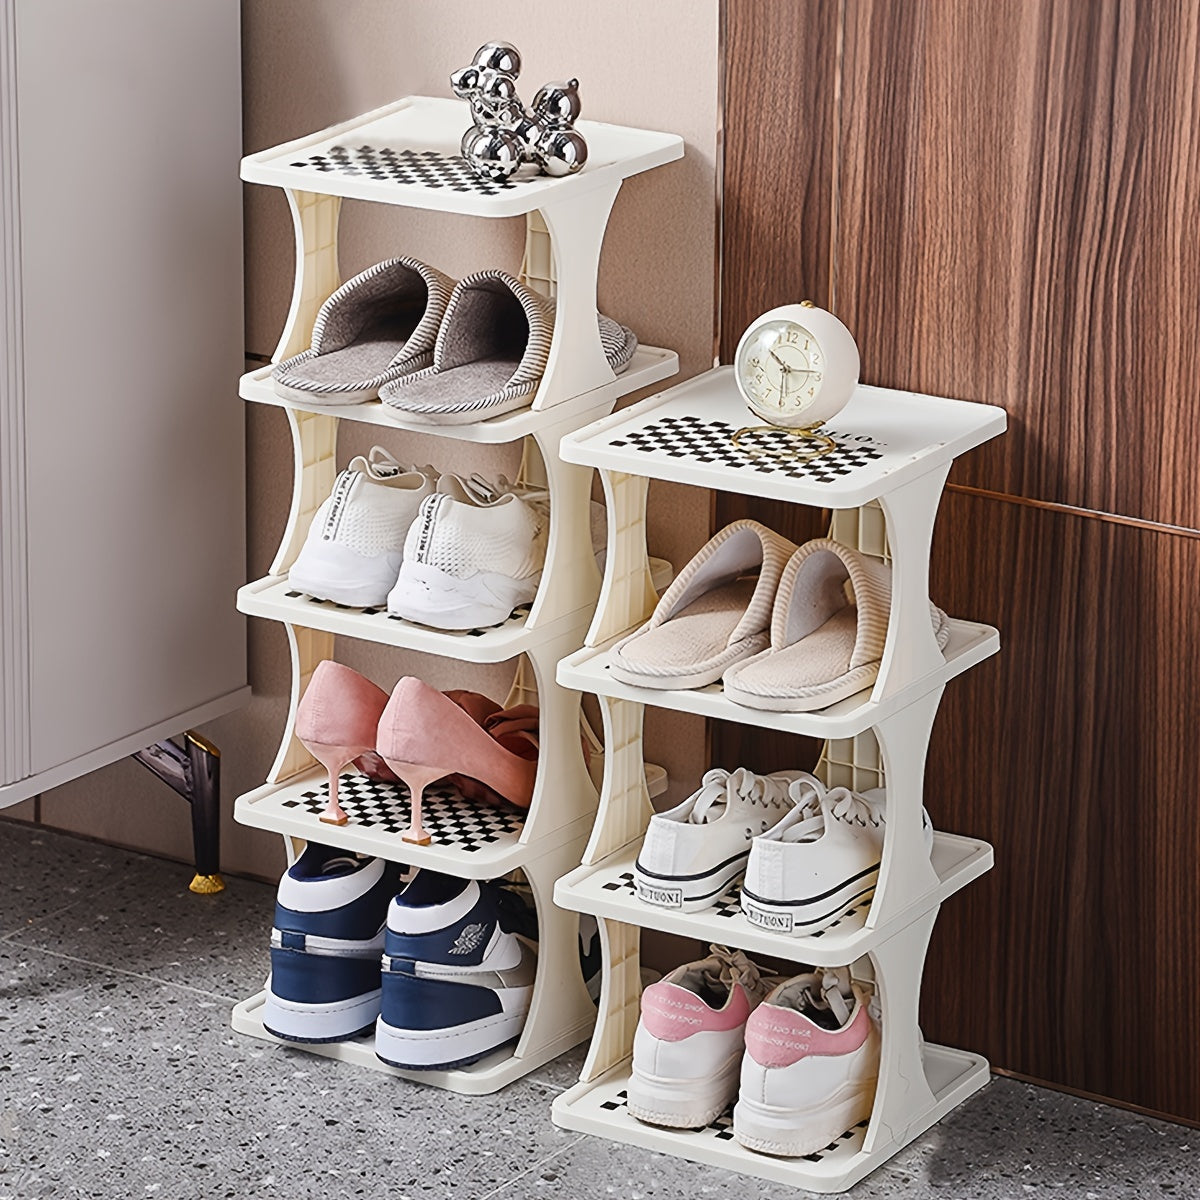 Maximize Your Space with a 1pc Multi-Layer Shoe Rack - Perfect for Any Household Doorway! ➡ SO-00025